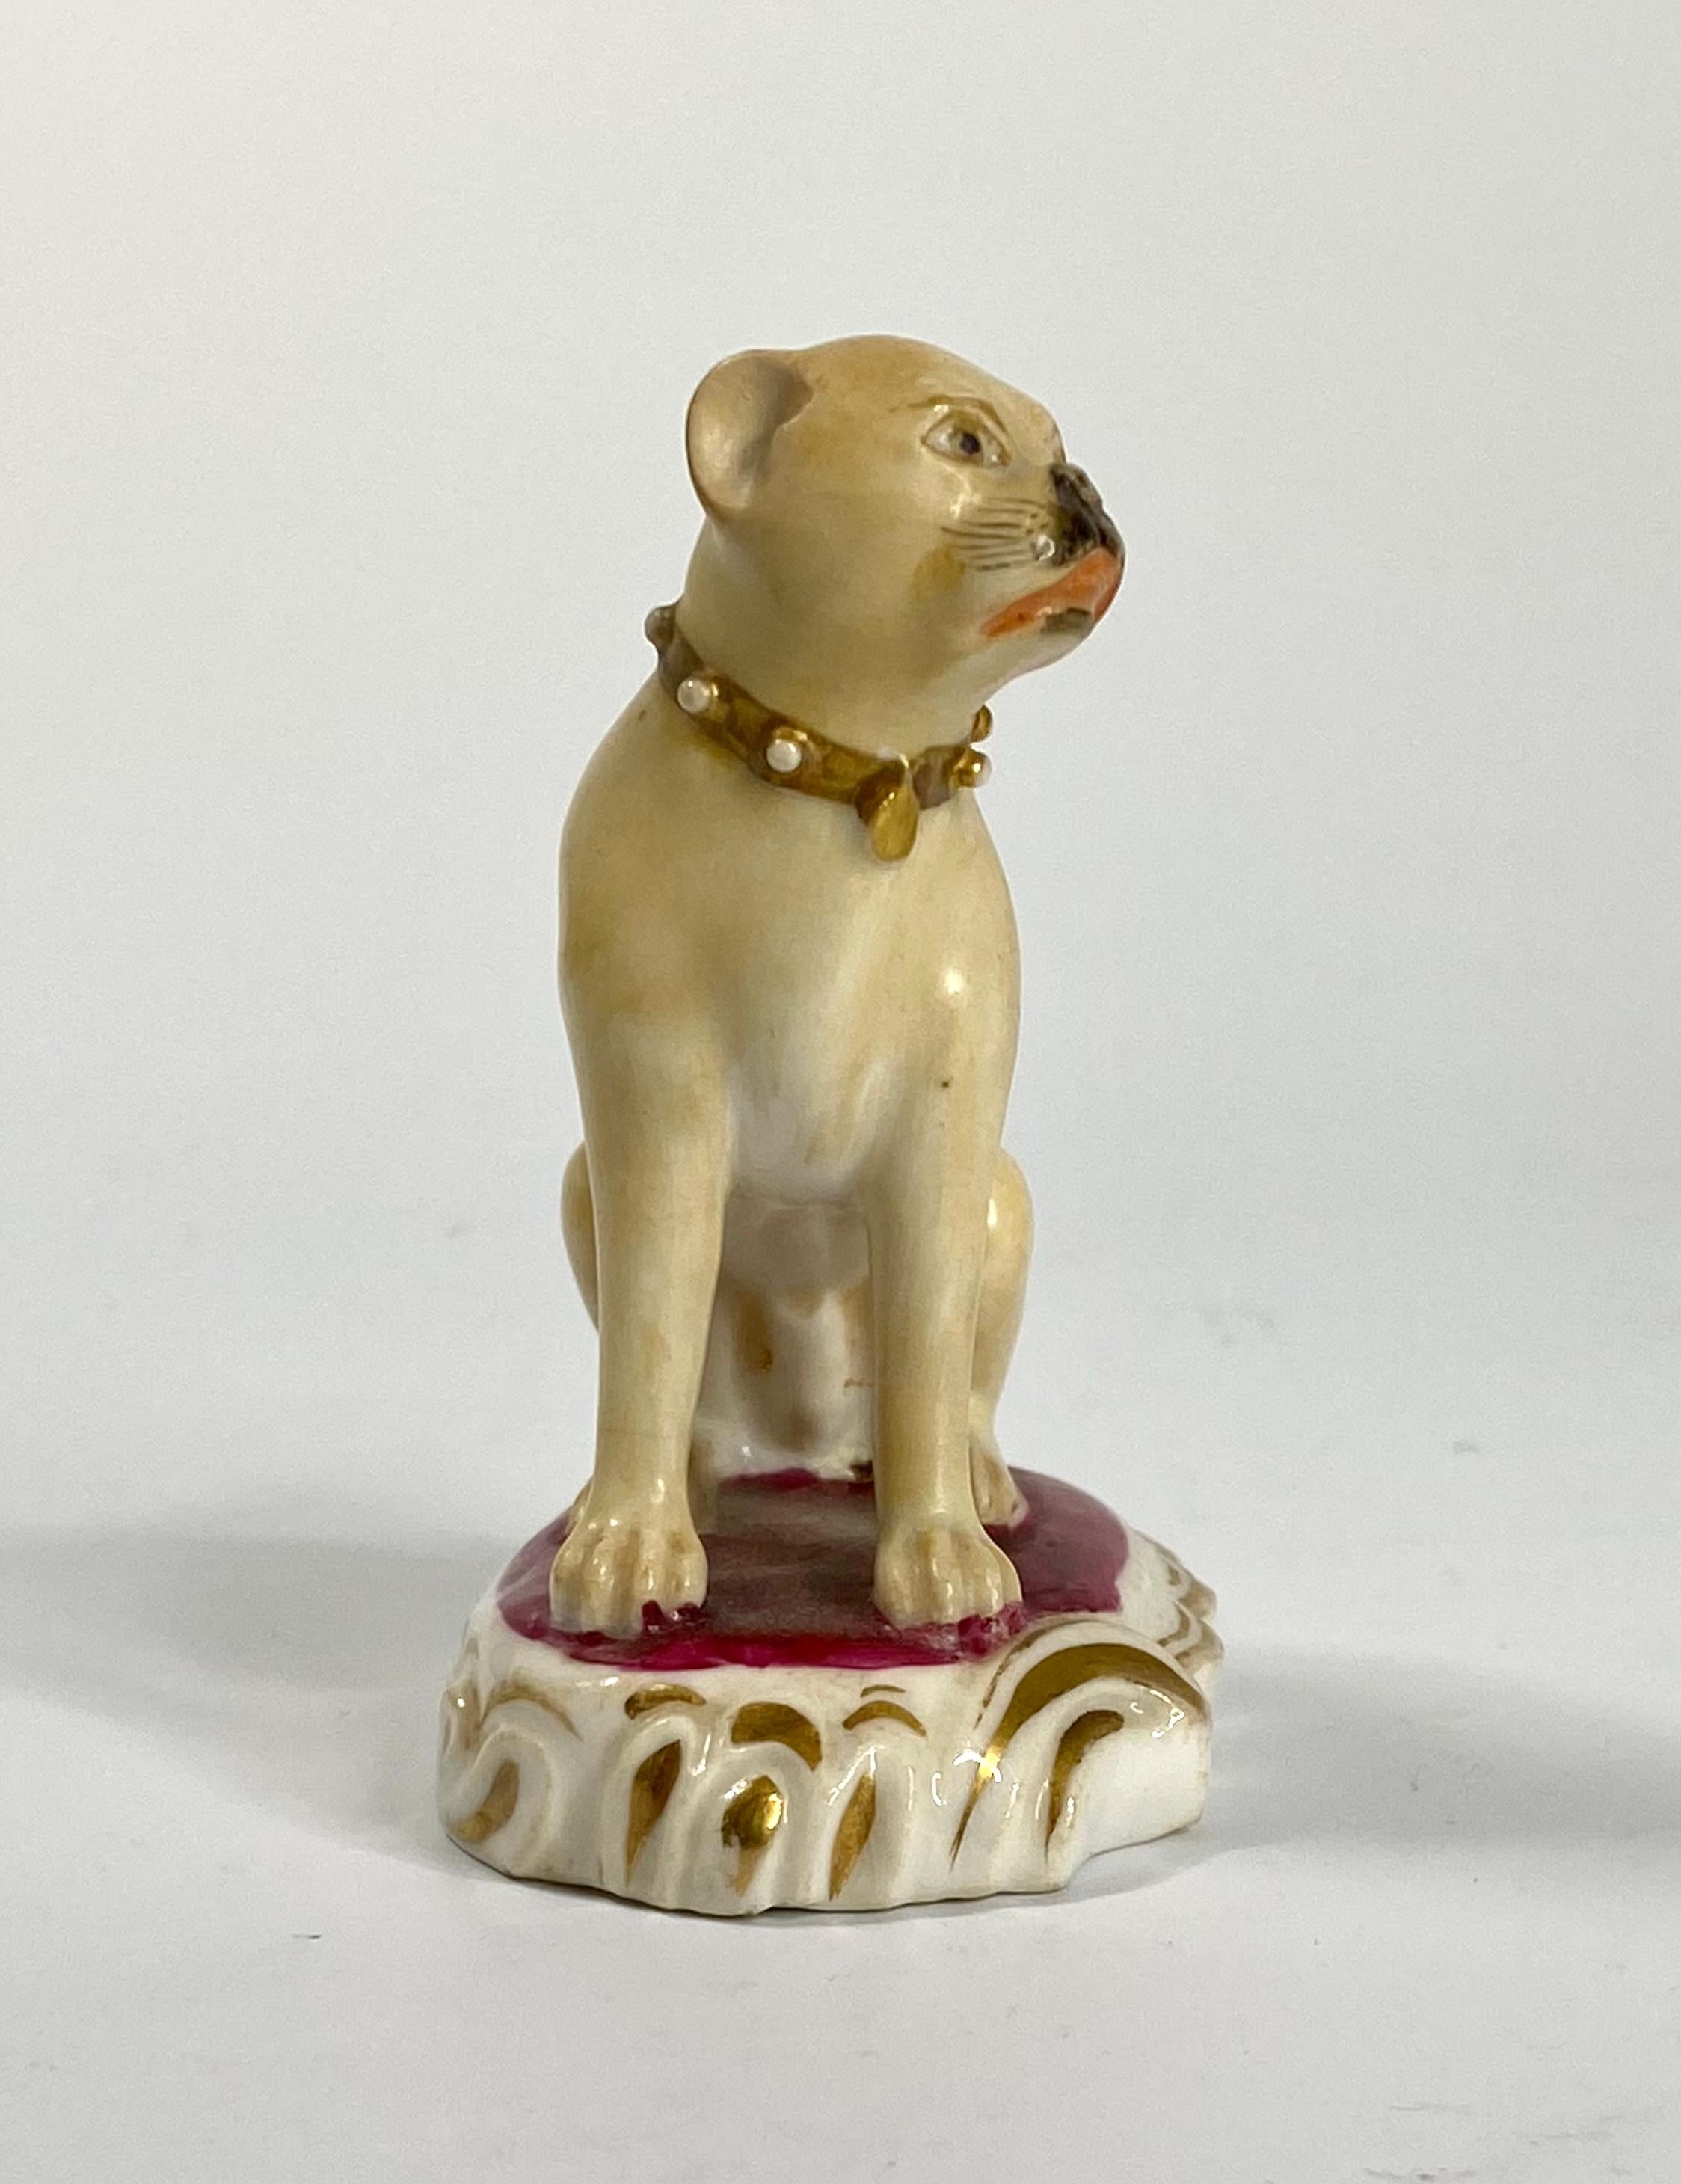 Rare Rockingham porcelain pug dog, c. 1835. The well modelled, seated pug dog, wearing a gilt, studded collar, with a puce rosette and gilt name tag attached. Seated upon a puce cushion base, edged with moulded rococo scrolls, heightened in